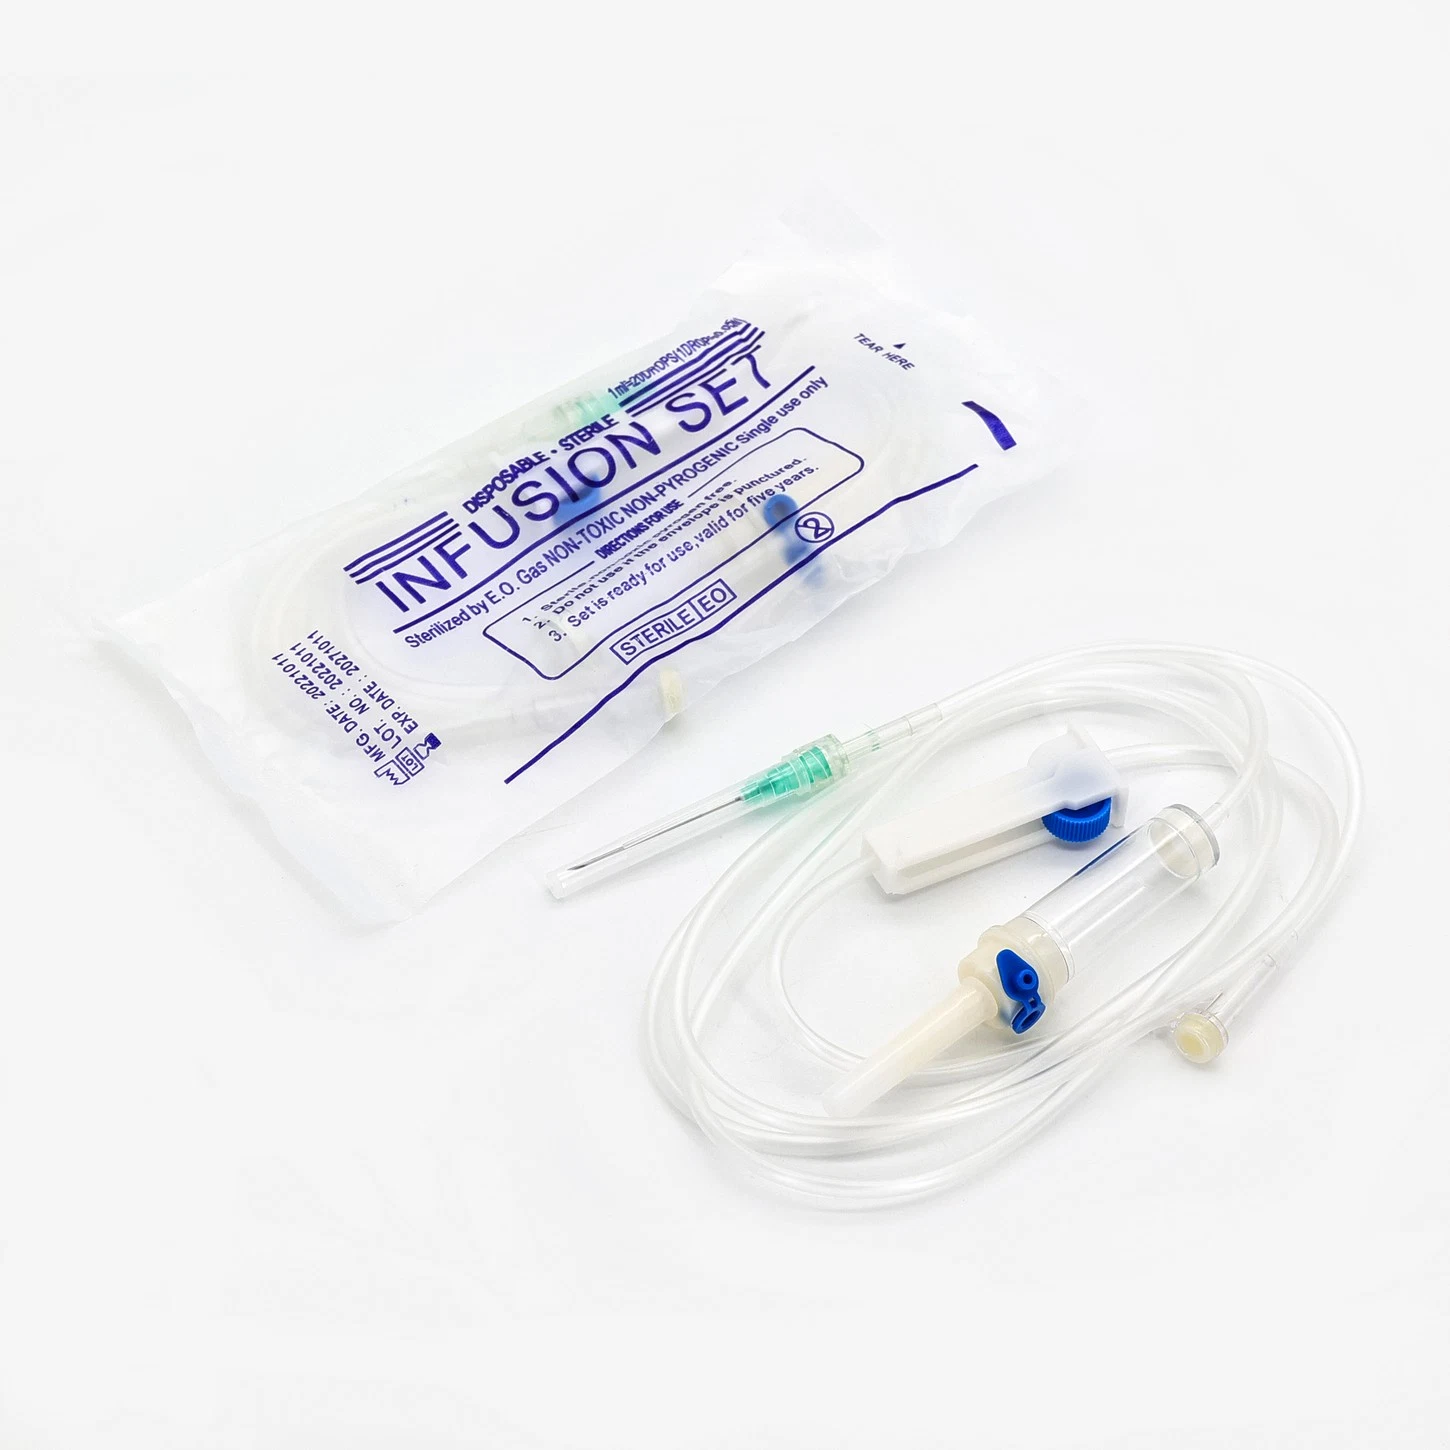 Medical Disposable Sterile Luer Slip/Luer Lock Latex Free Intravenous Infusion Set with Needle with Air Vent/Filter